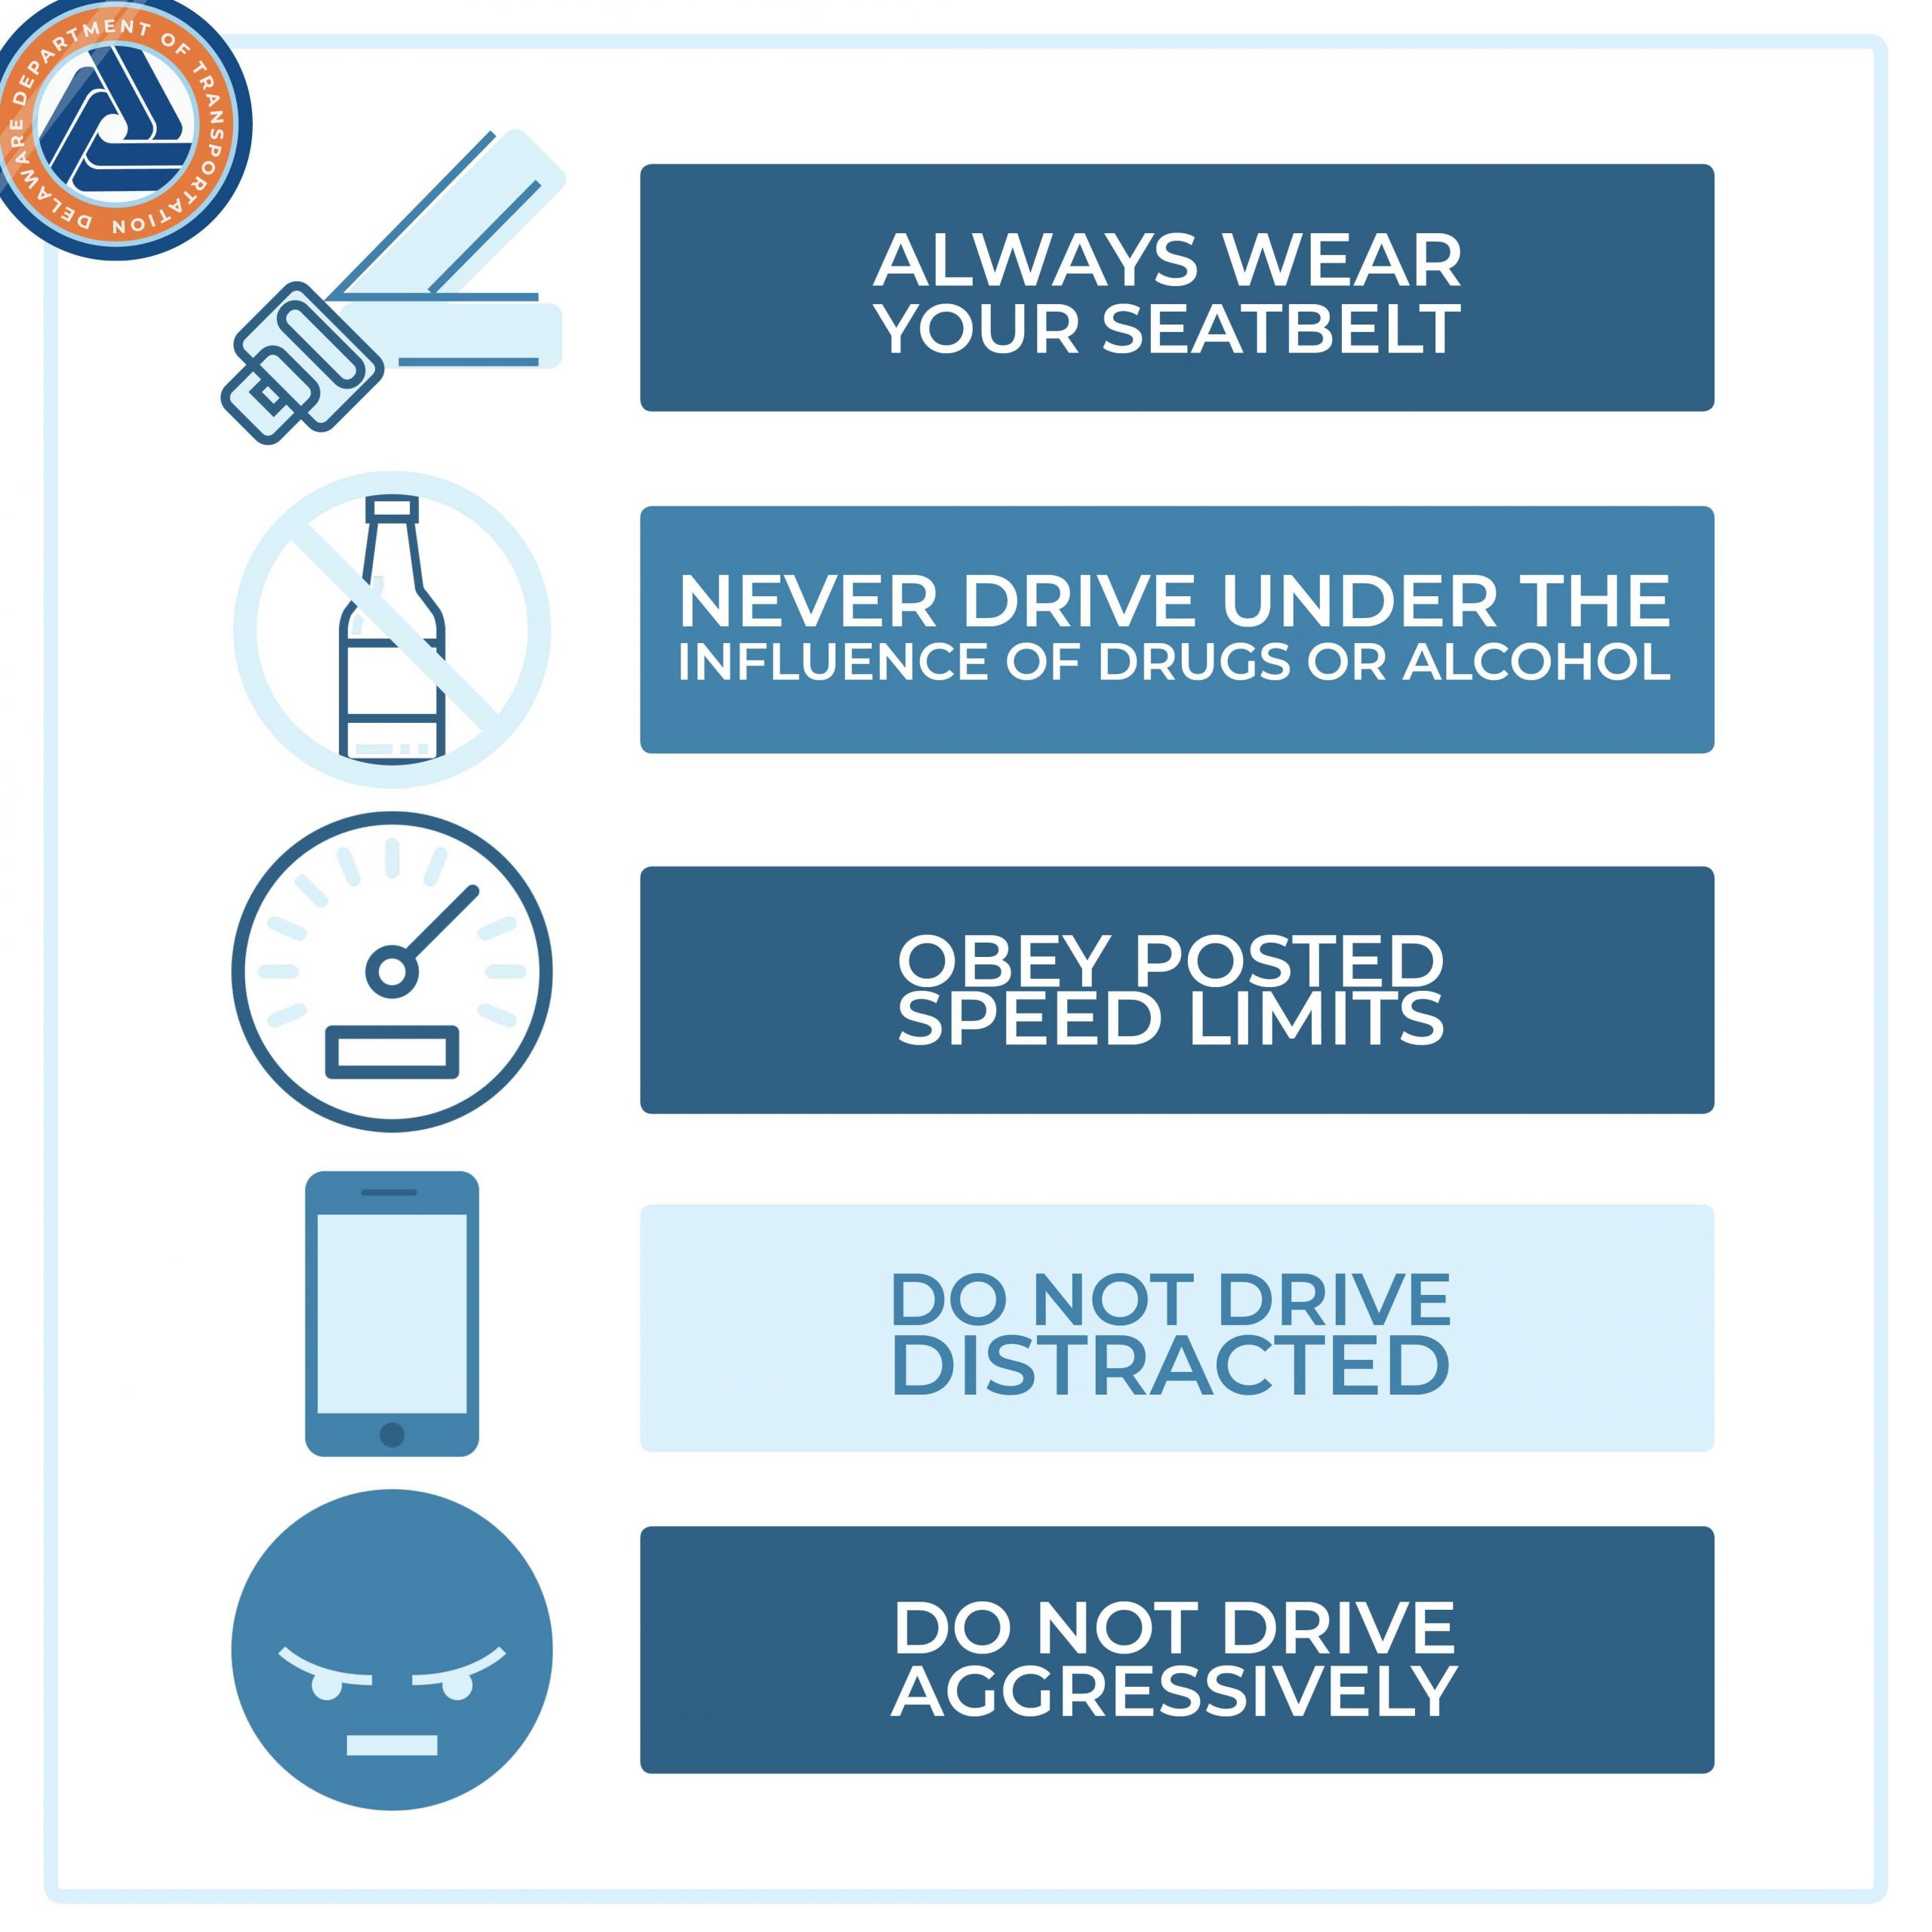 This graphic offers safe driving reminders to not drive aggressively, not driving distracted, and not driving under the influence.